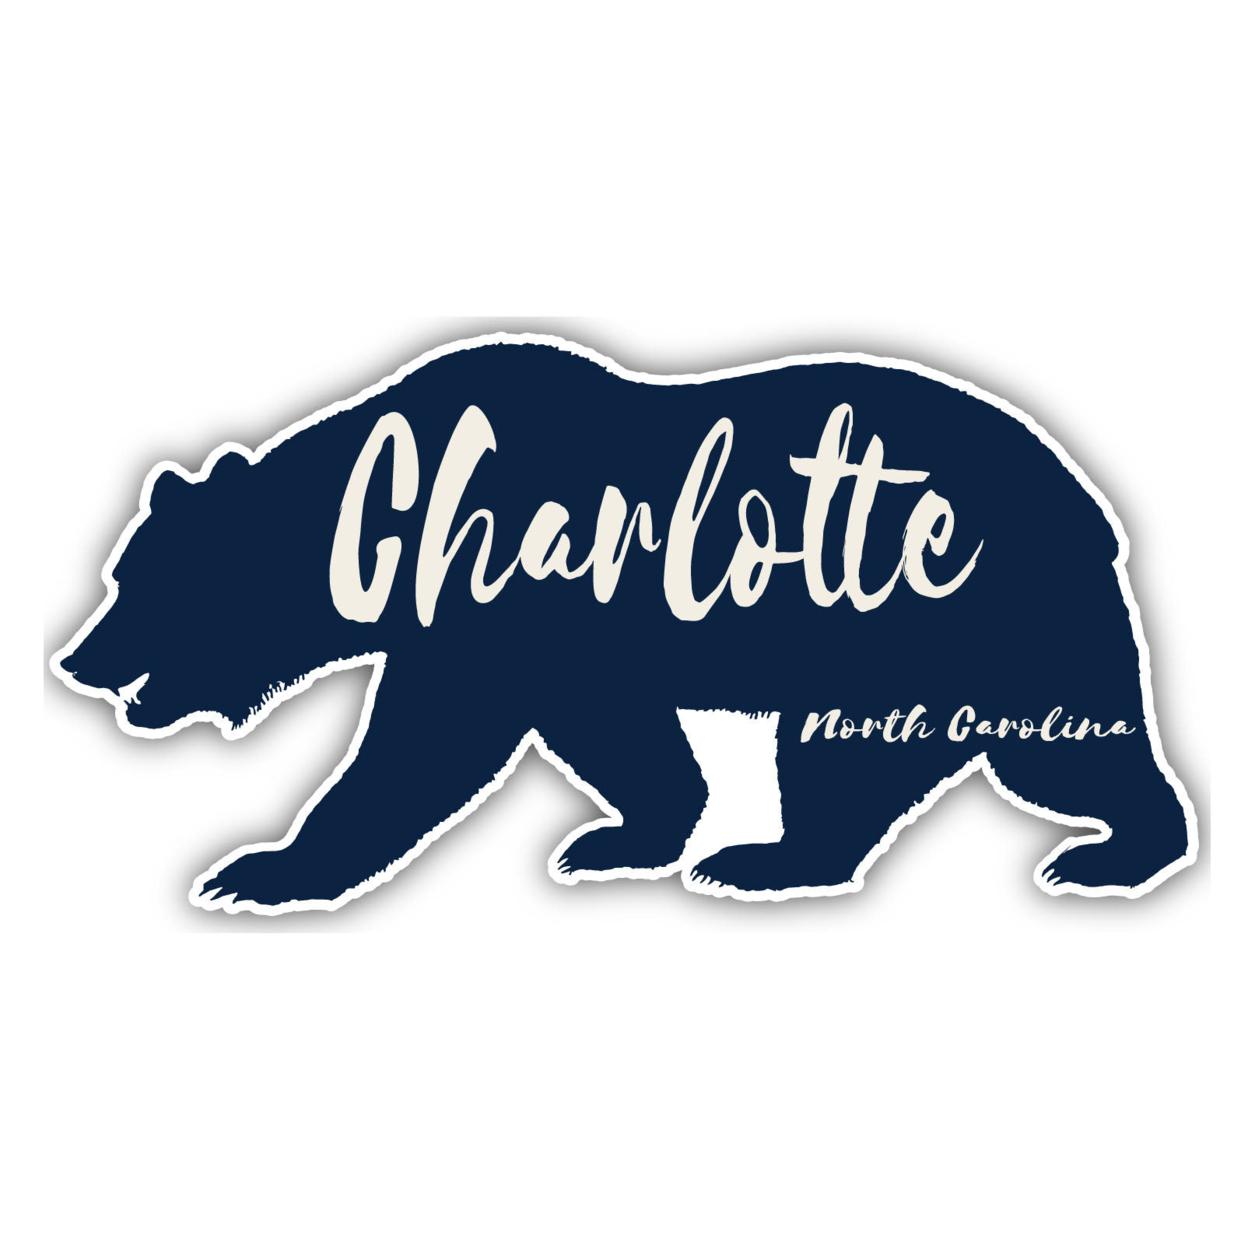 Charlotte North Carolina Souvenir Decorative Stickers (Choose Theme And Size) - 4-Pack, 8-Inch, Great Outdoors